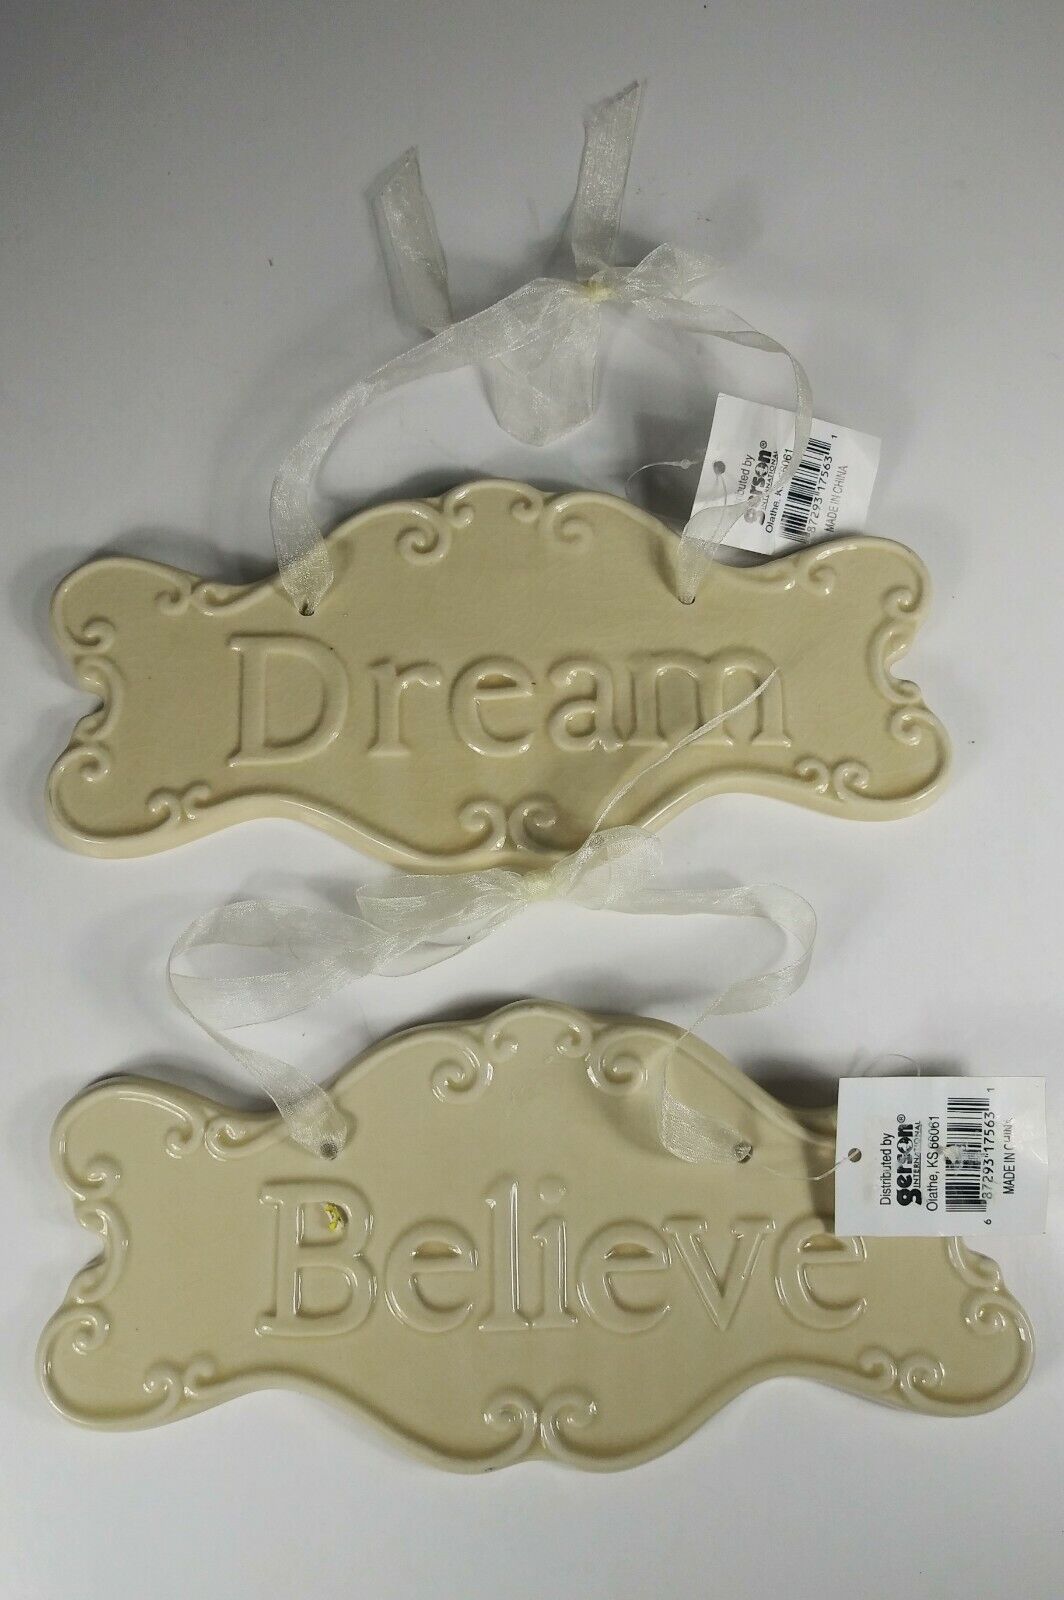  Dream Believe Spelled Out Porcelain Wall Hangings 9\